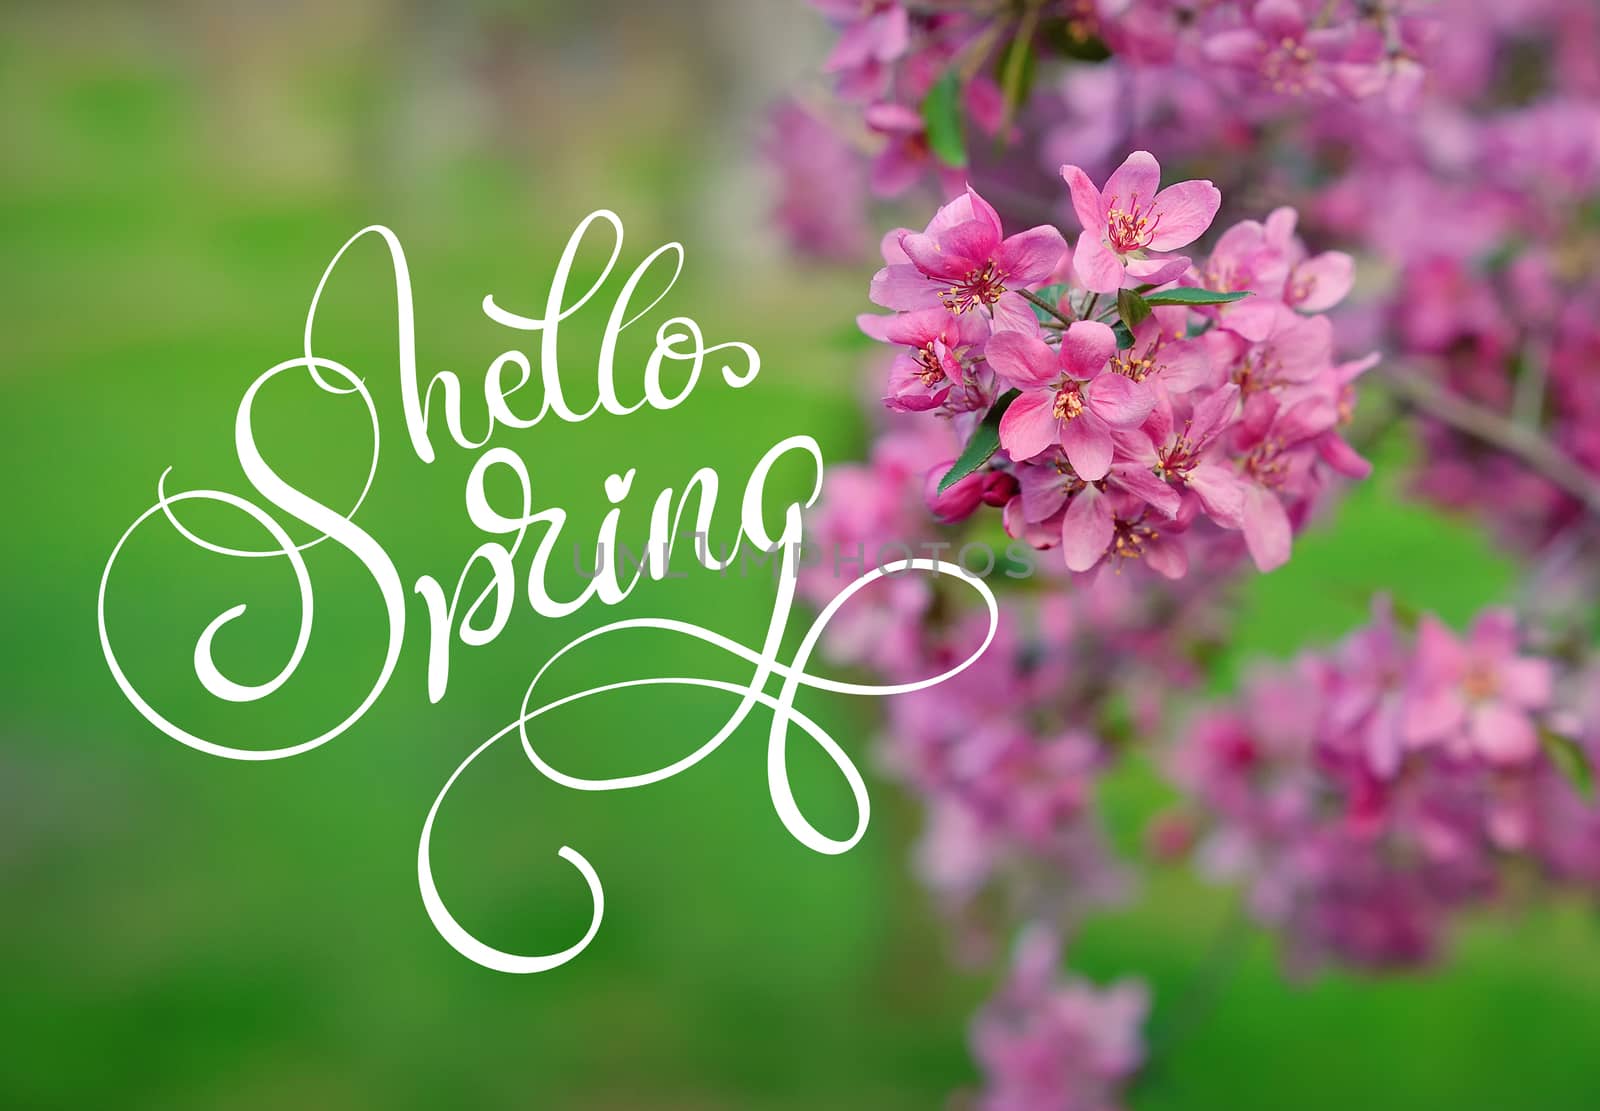 Blossoming apple-tree on a background of green grass and text Hello Spring. Calligraphy lettering by timonko